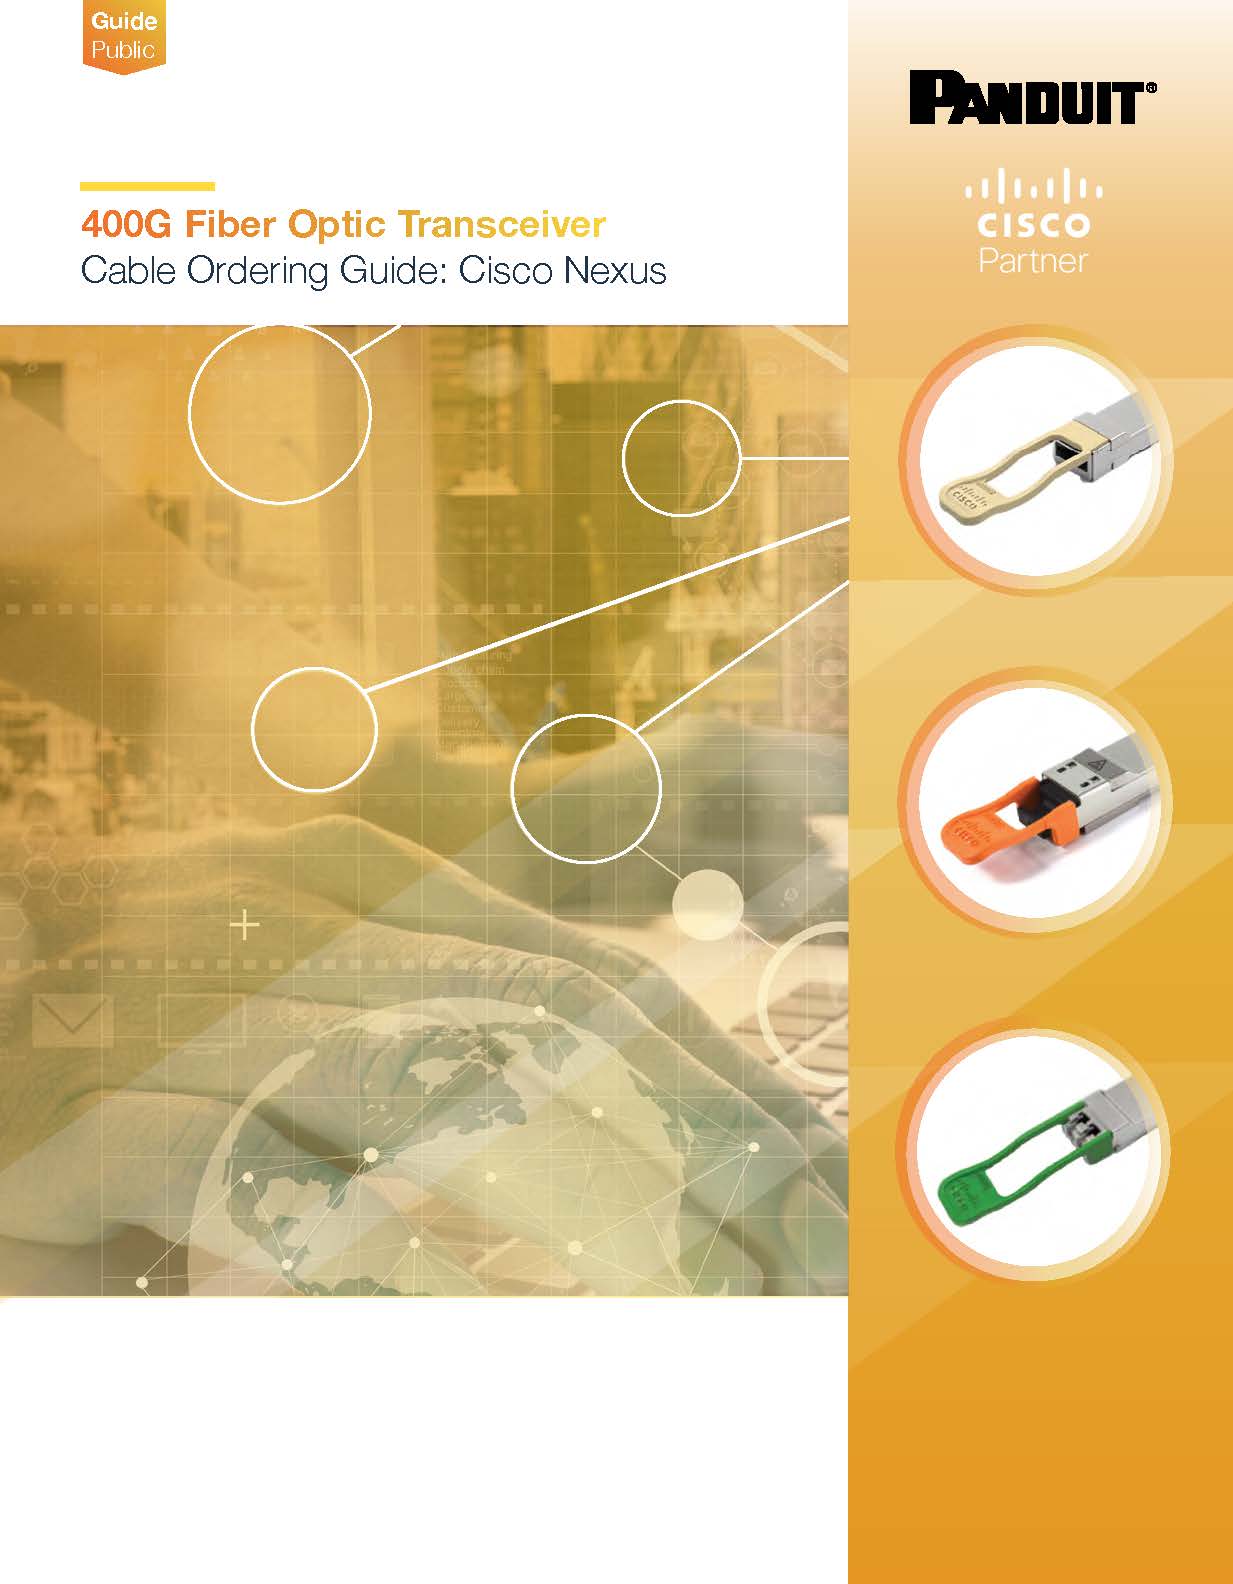 400G Fiber Transceiver Cable Ordering Guide